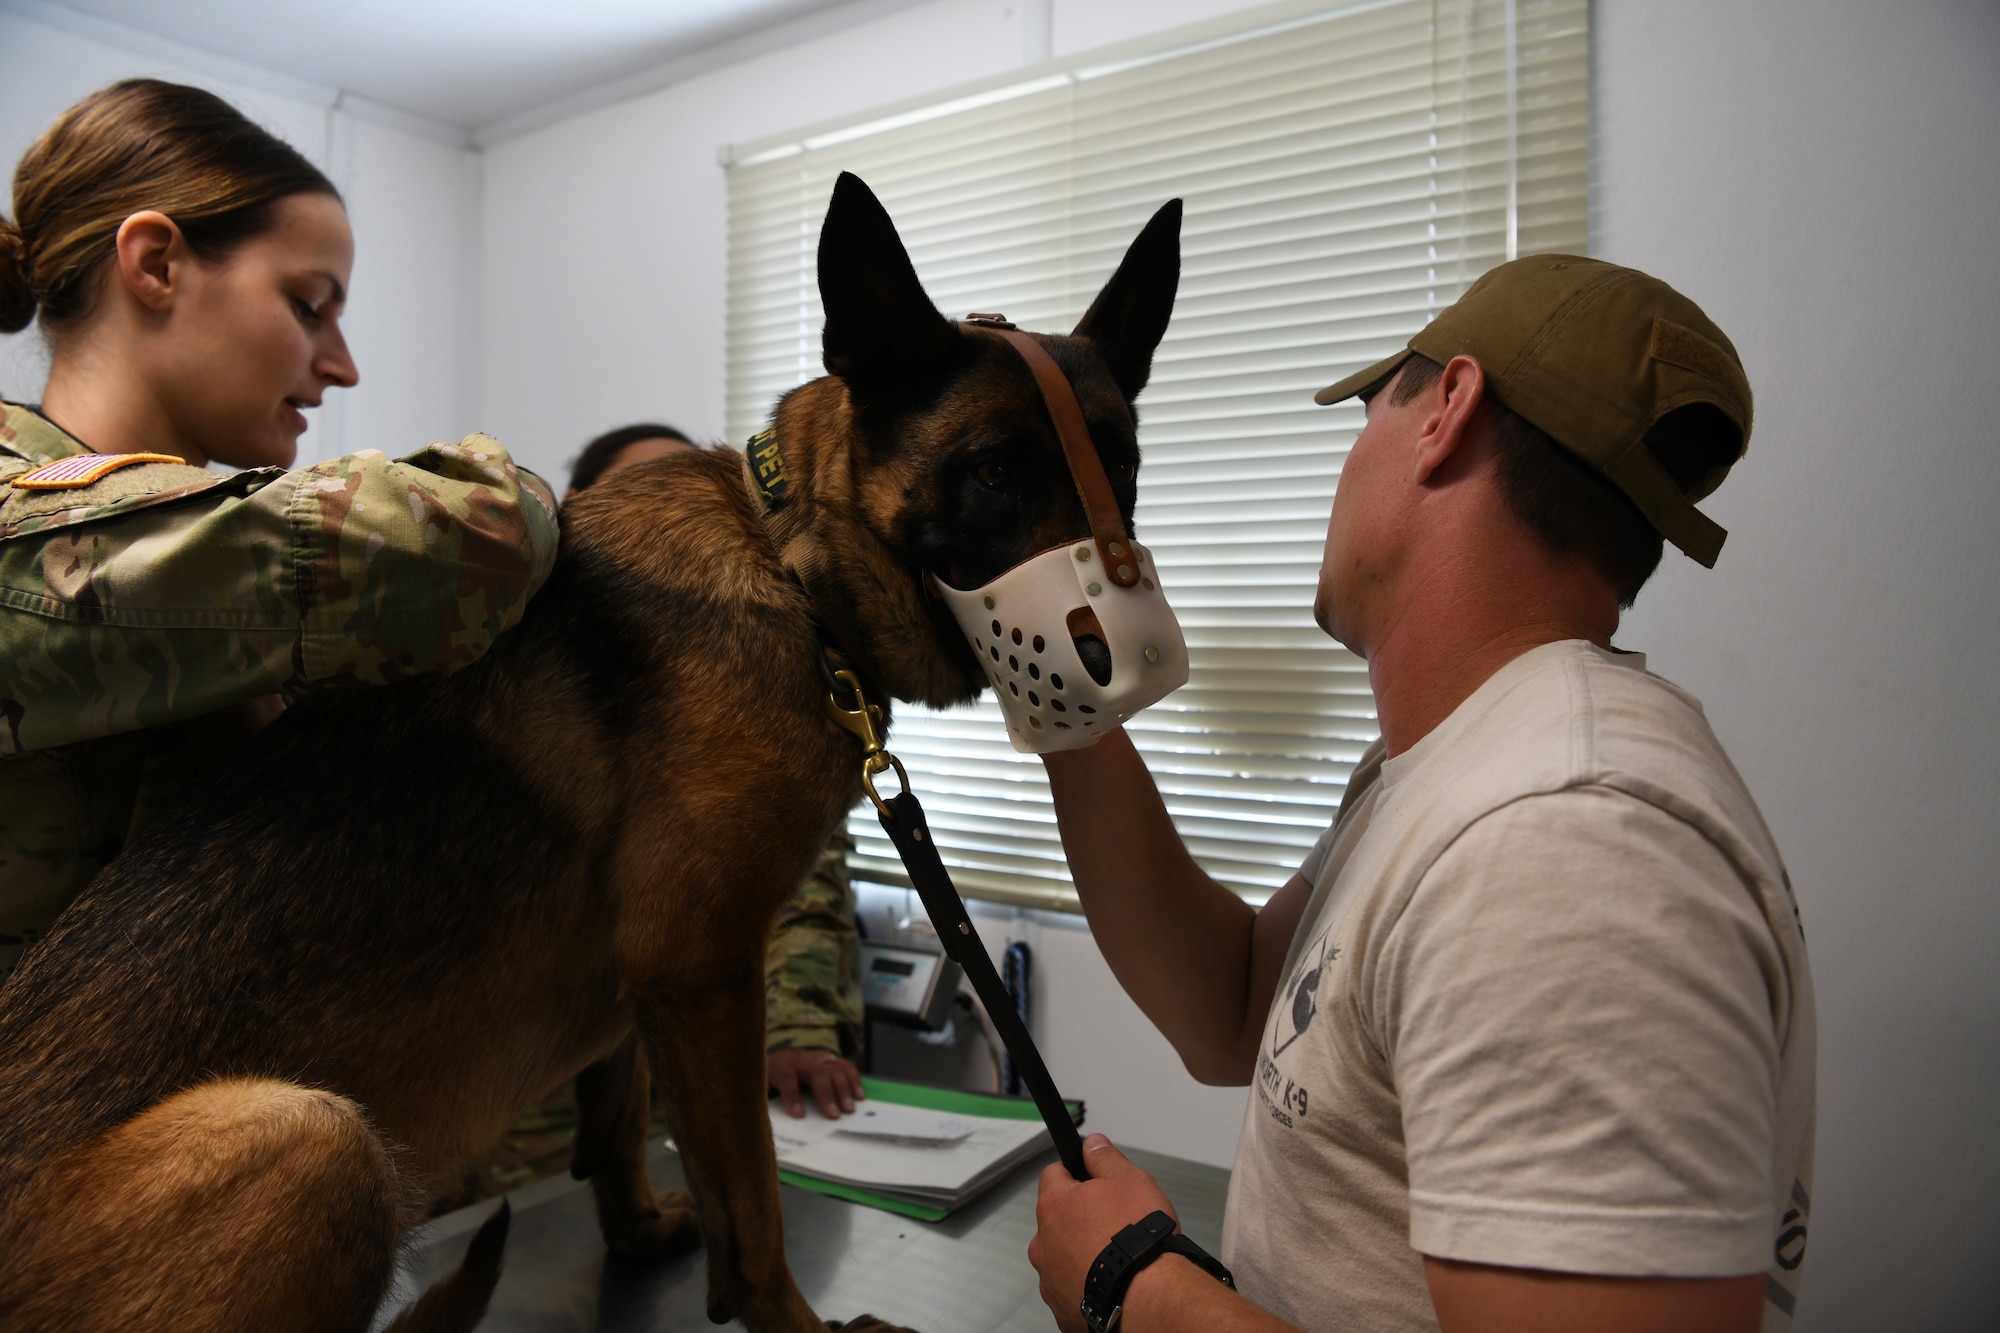 U.S. Army Capt. Casey Barwell, Ellsworth Air Force Base Veterinary Section officer in charge, provides a wellness checkup to Anita, a 28th Security Forces Squadron explosive detector dog,  at the Veterinarian Treatment Facility at Ellsworth AFB, S.D., July 30, 2019. The clinic is currently under renovations, however, Barwell and her team are still seeing patients for wellness appointments only. (U.S. Air Force photo by Airman Quentin K. Marx)